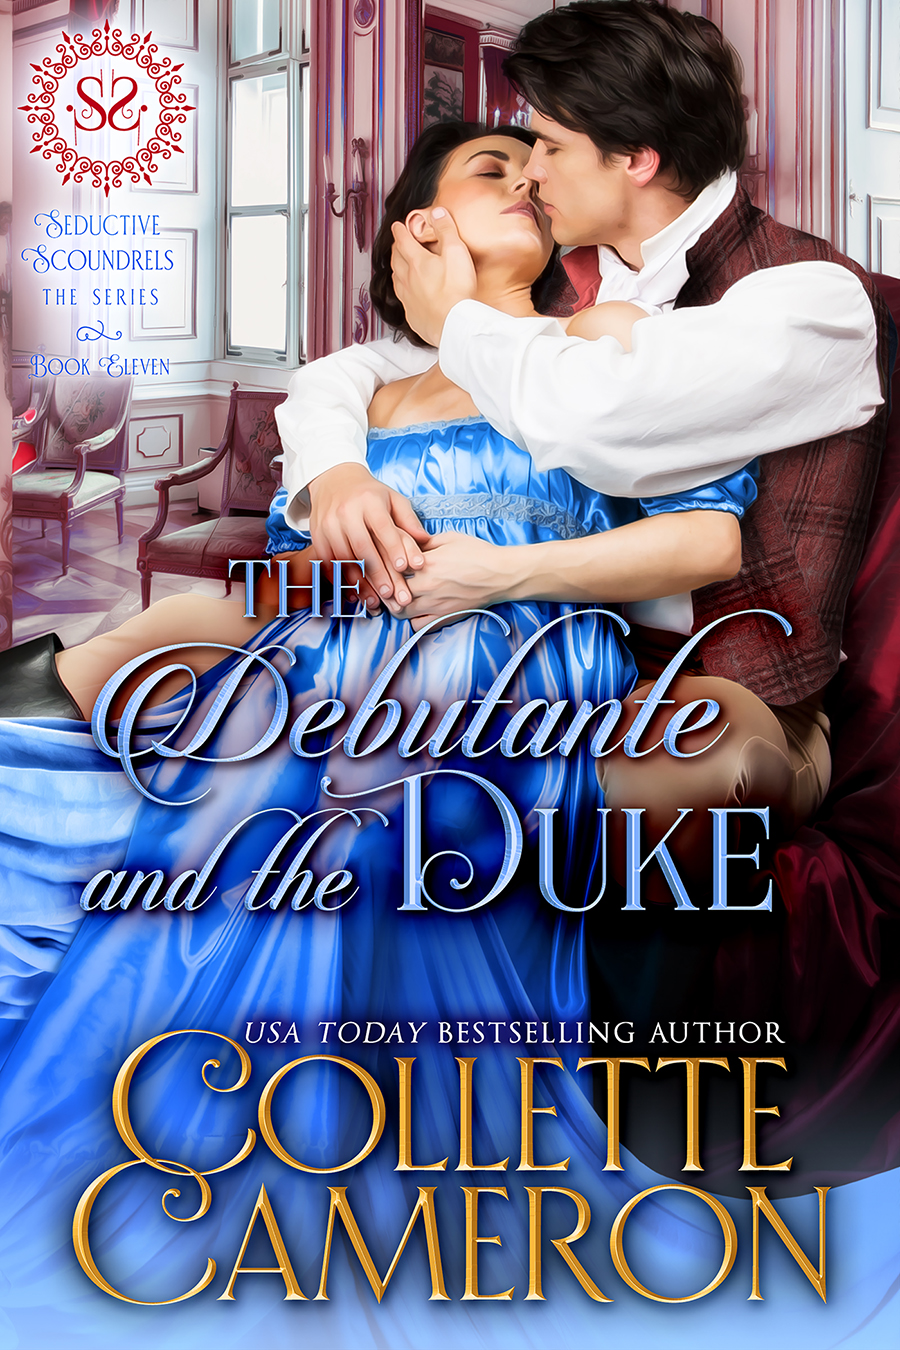 Seductive Scoundrels Special: a FREE book and a 99¢ sale! 1